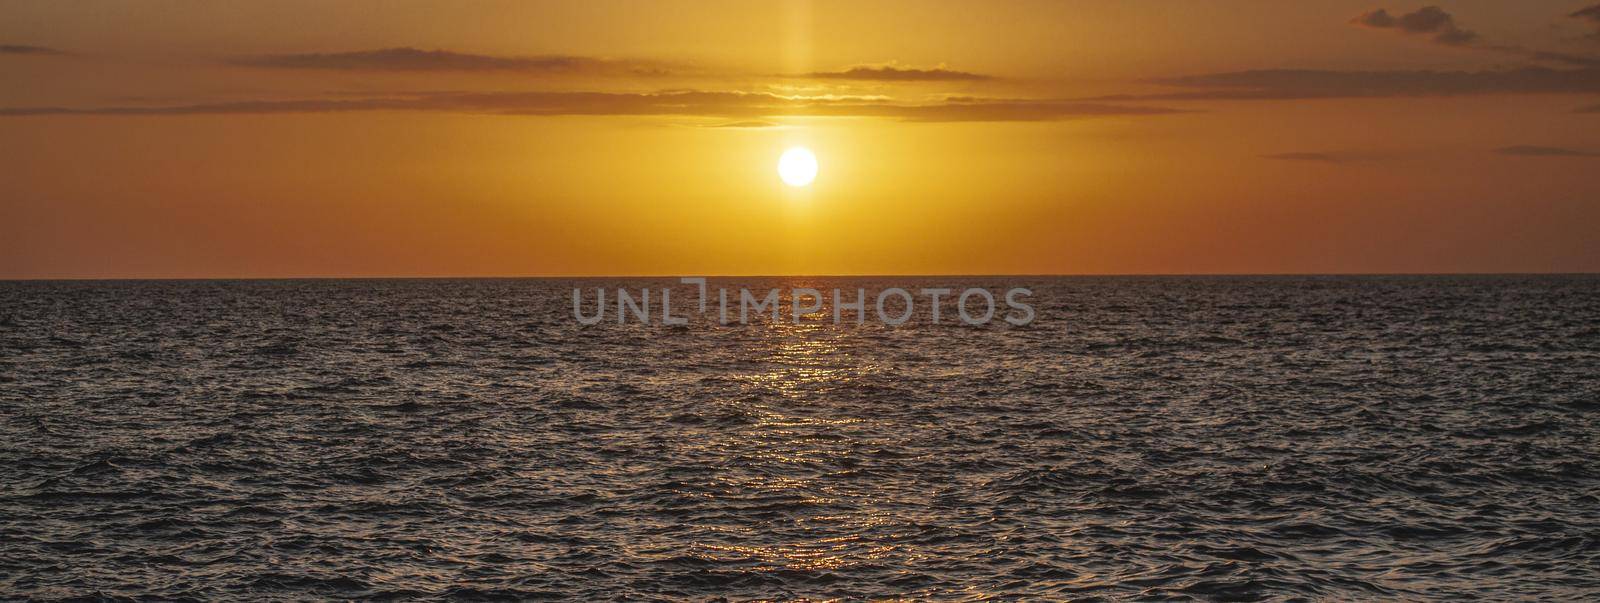 Sunset sea detail, banner image with copy space